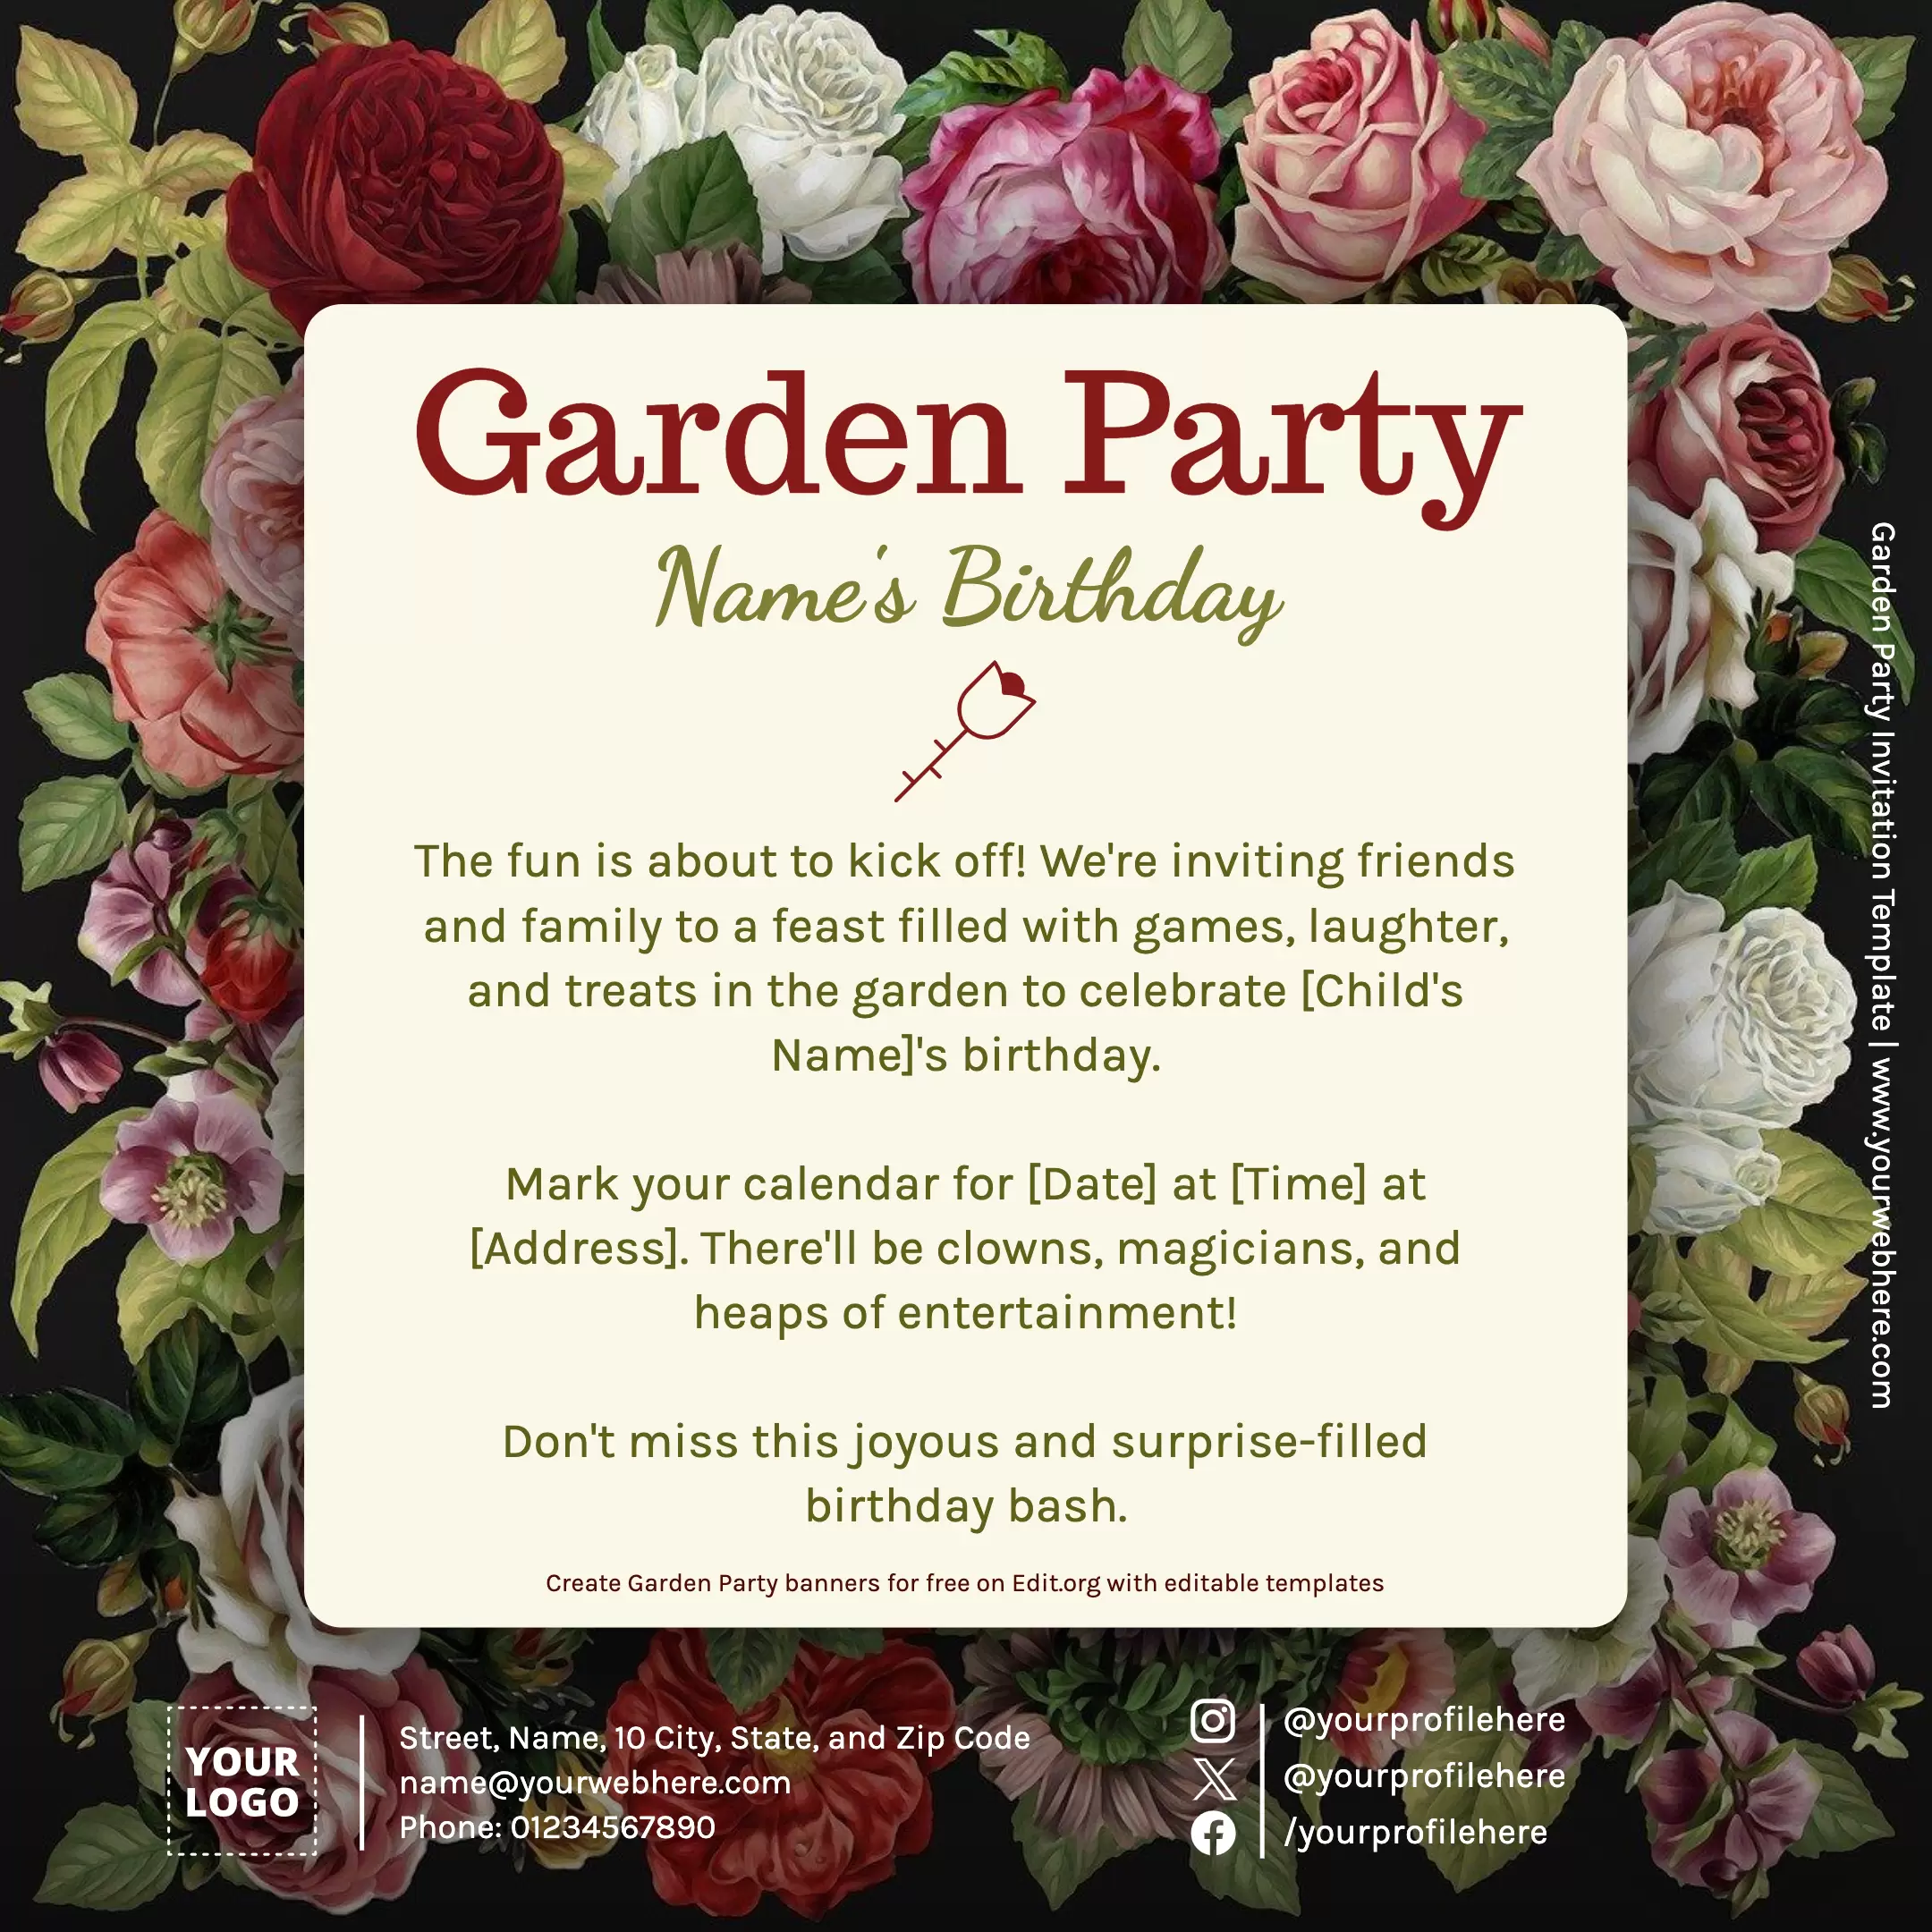 Create a custom invitation to a Garden Party for free